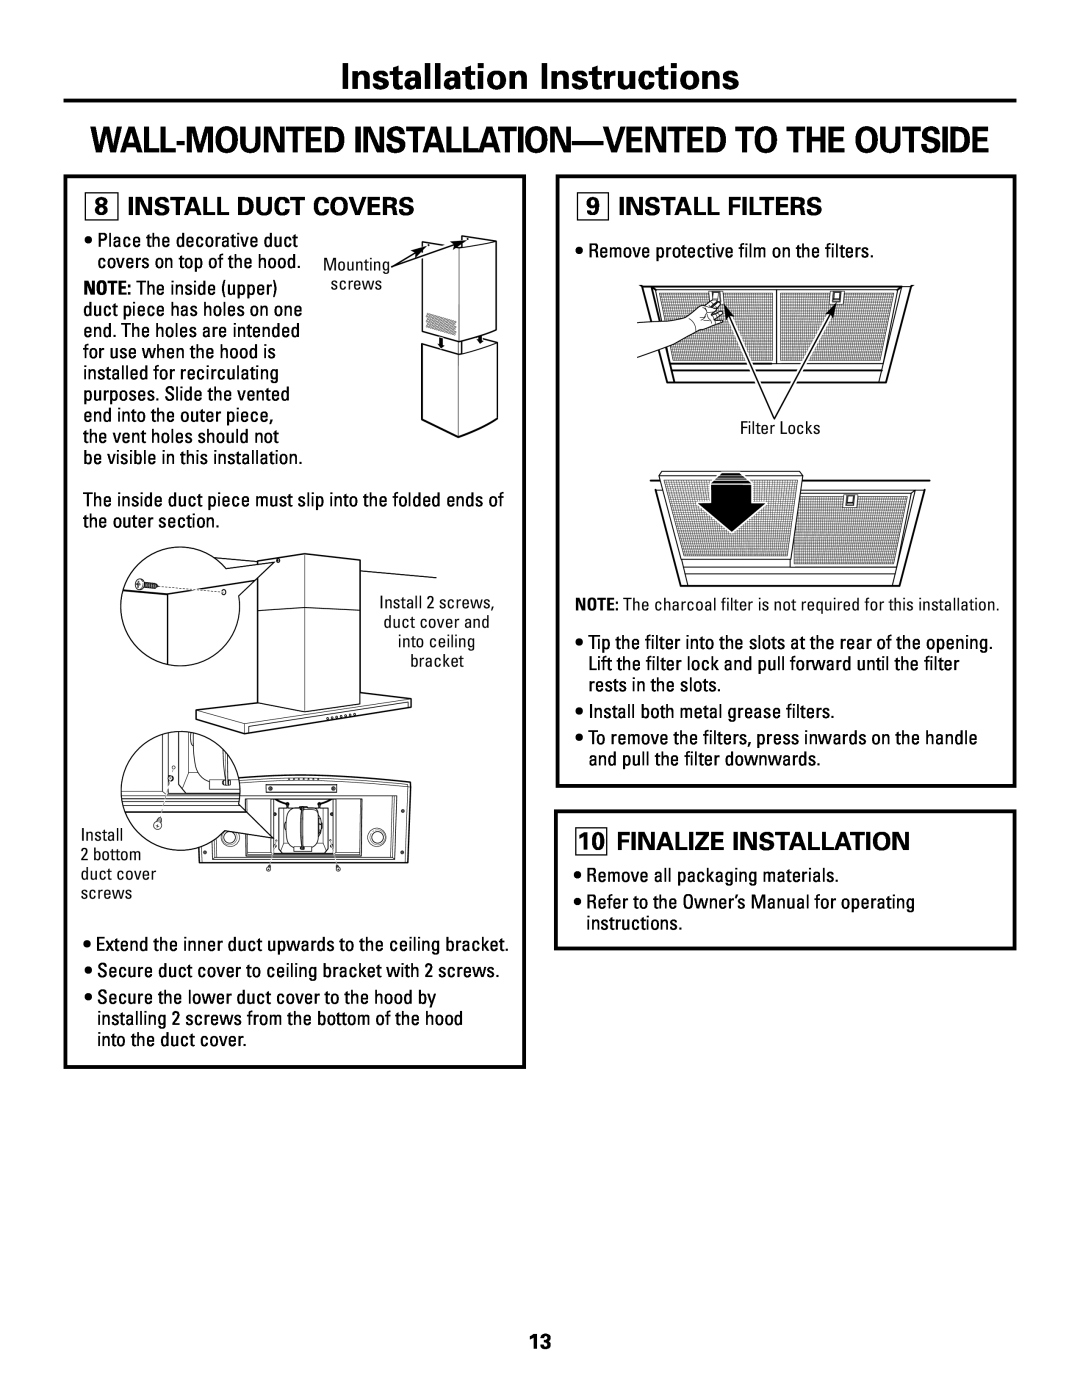 GE ZV800 installation instructions Install Duct Covers, Finalize Installation, Install Filters, Installation Instructions 